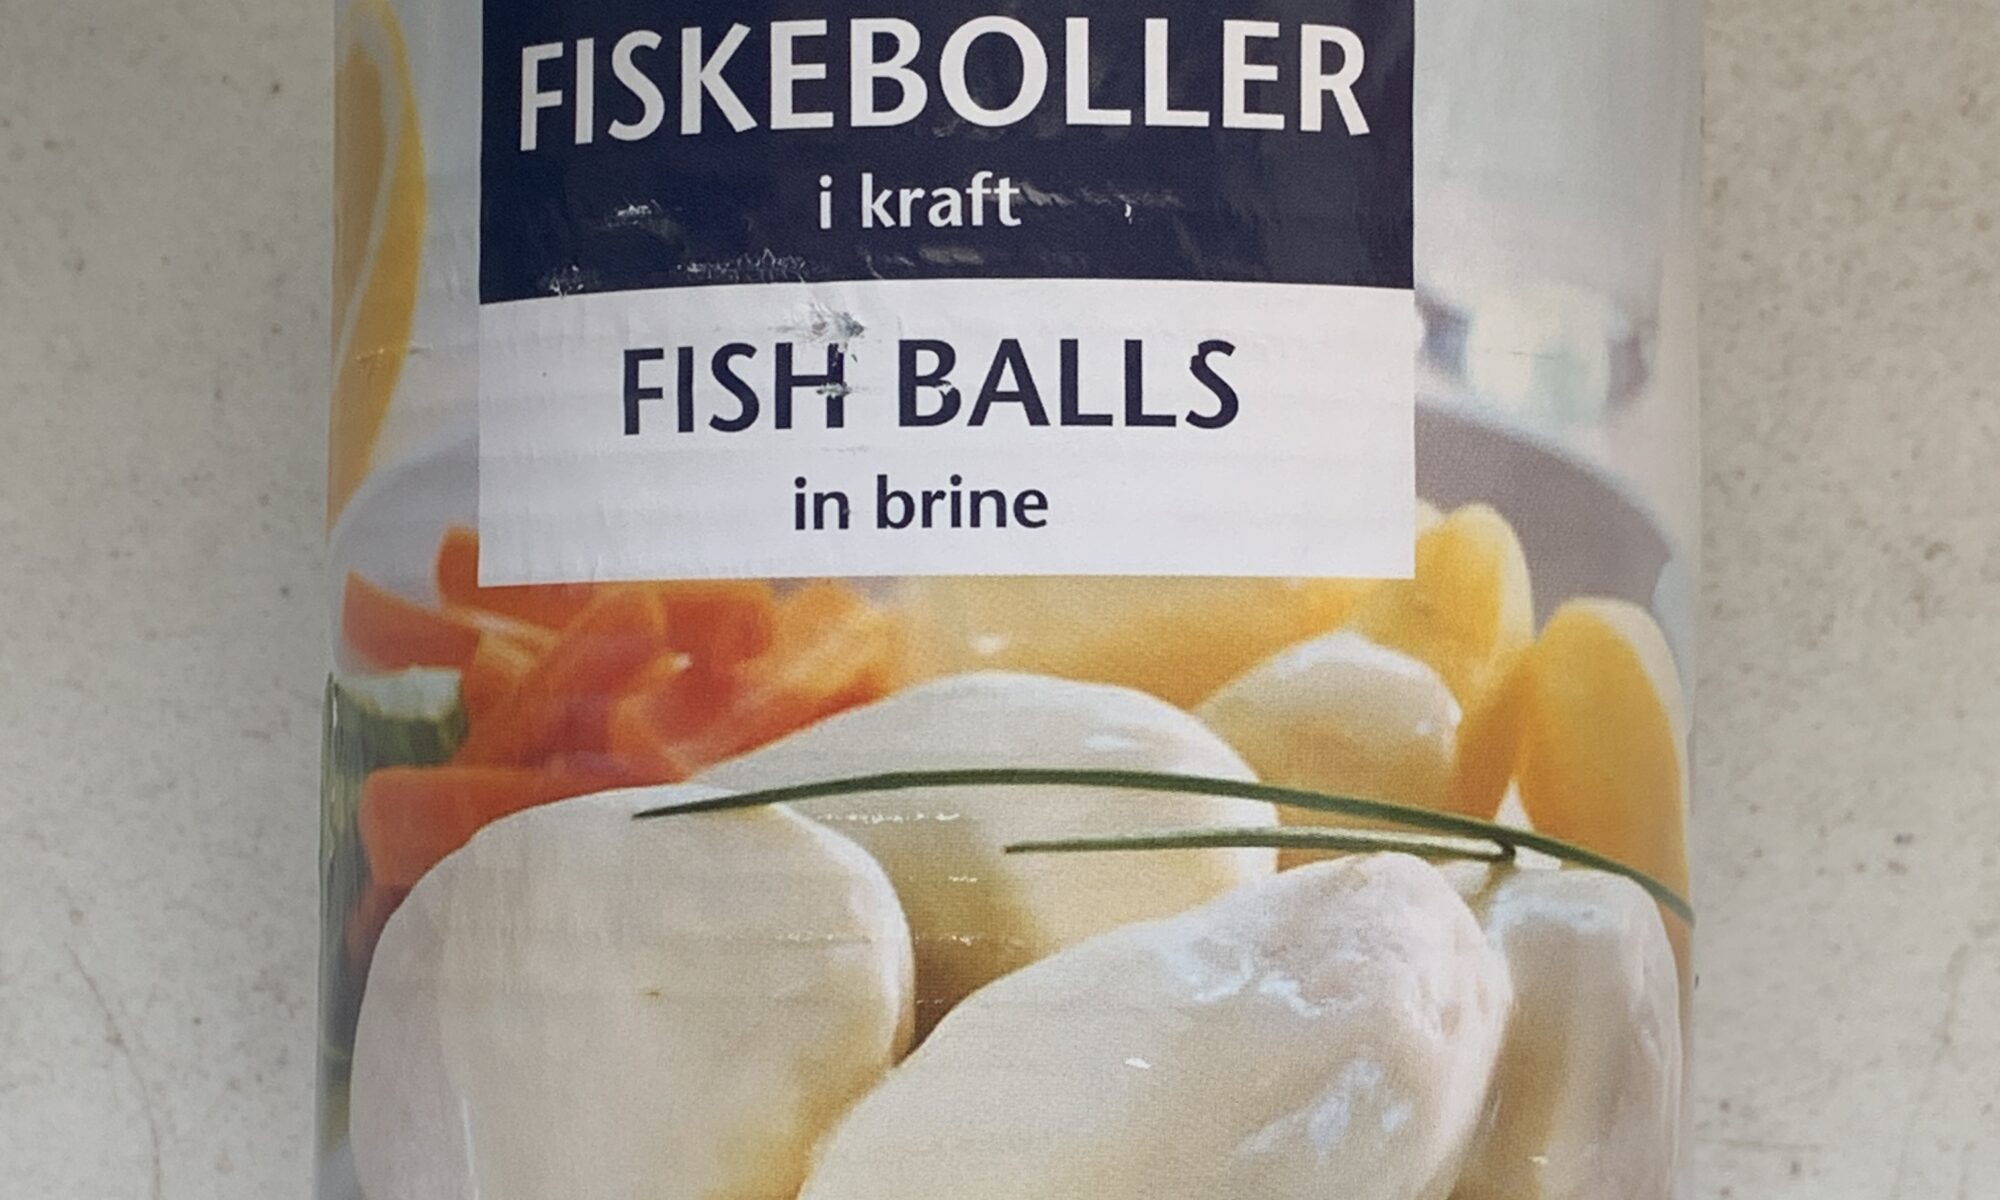 Image of the front of a can of Sunnmöre Fish Balls in Brine (Fiskeboller i kraft)